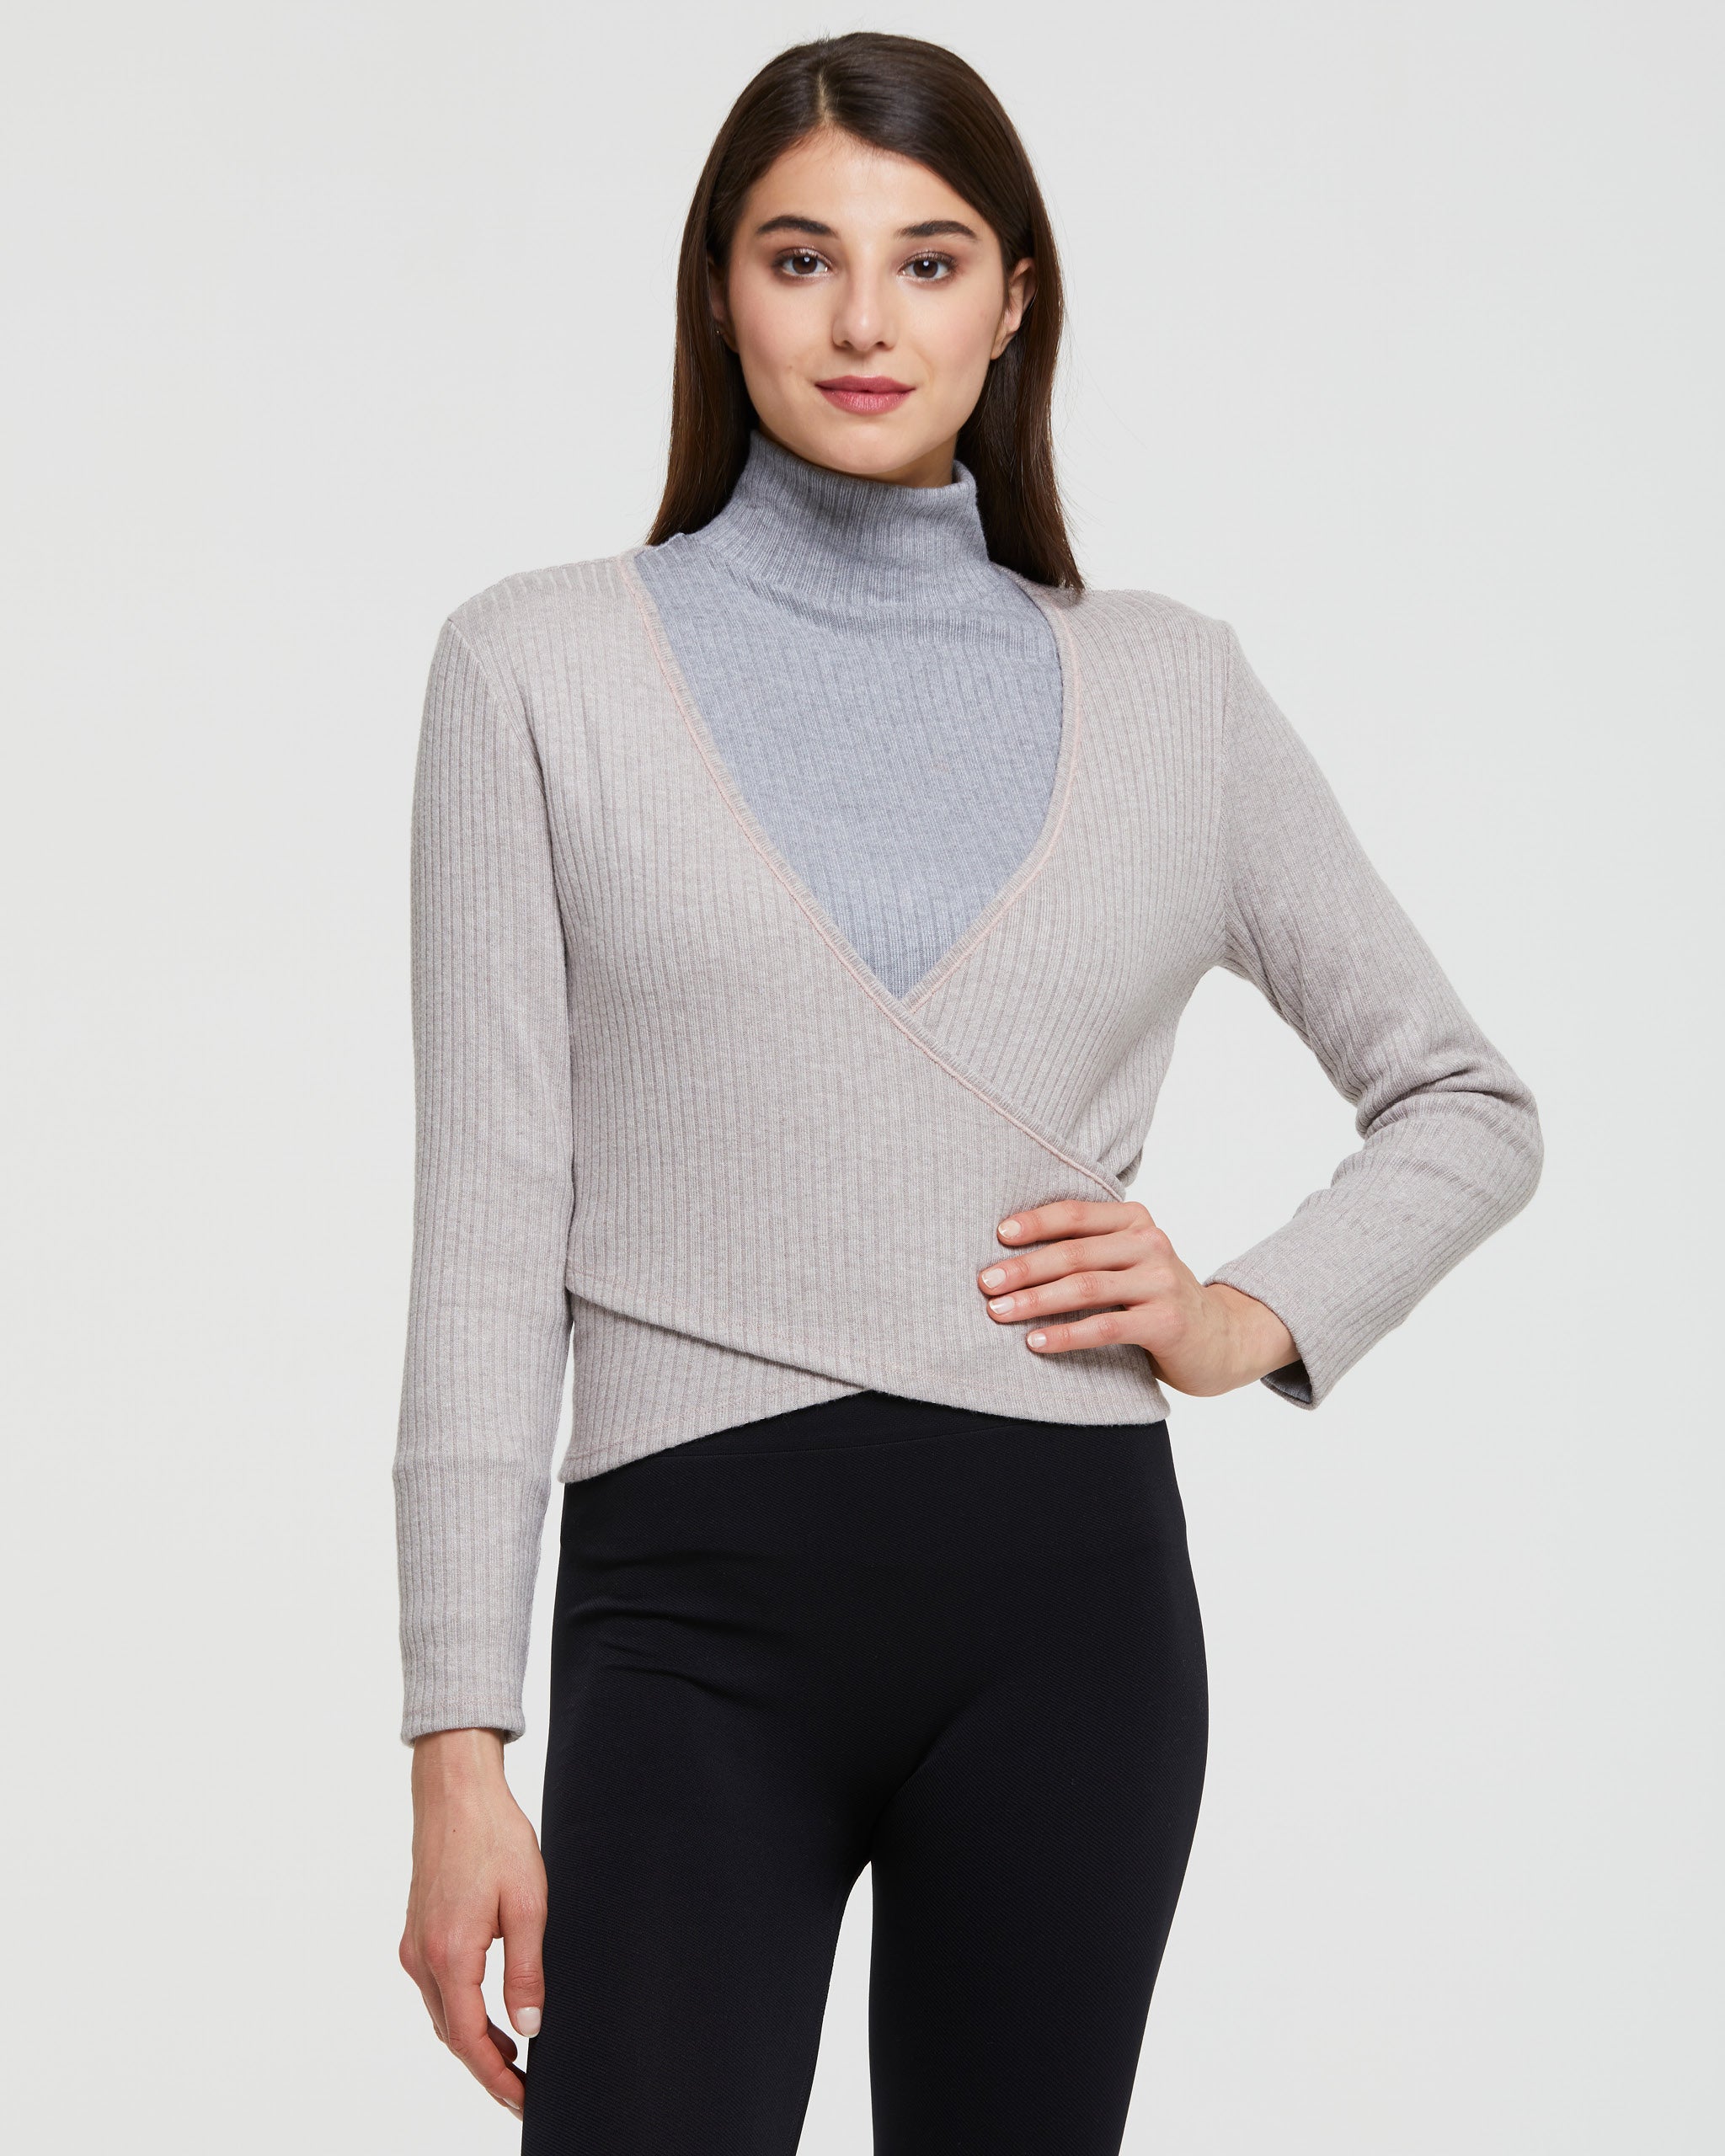 RIBBED TOP WITH A CROSSED PATTERN 